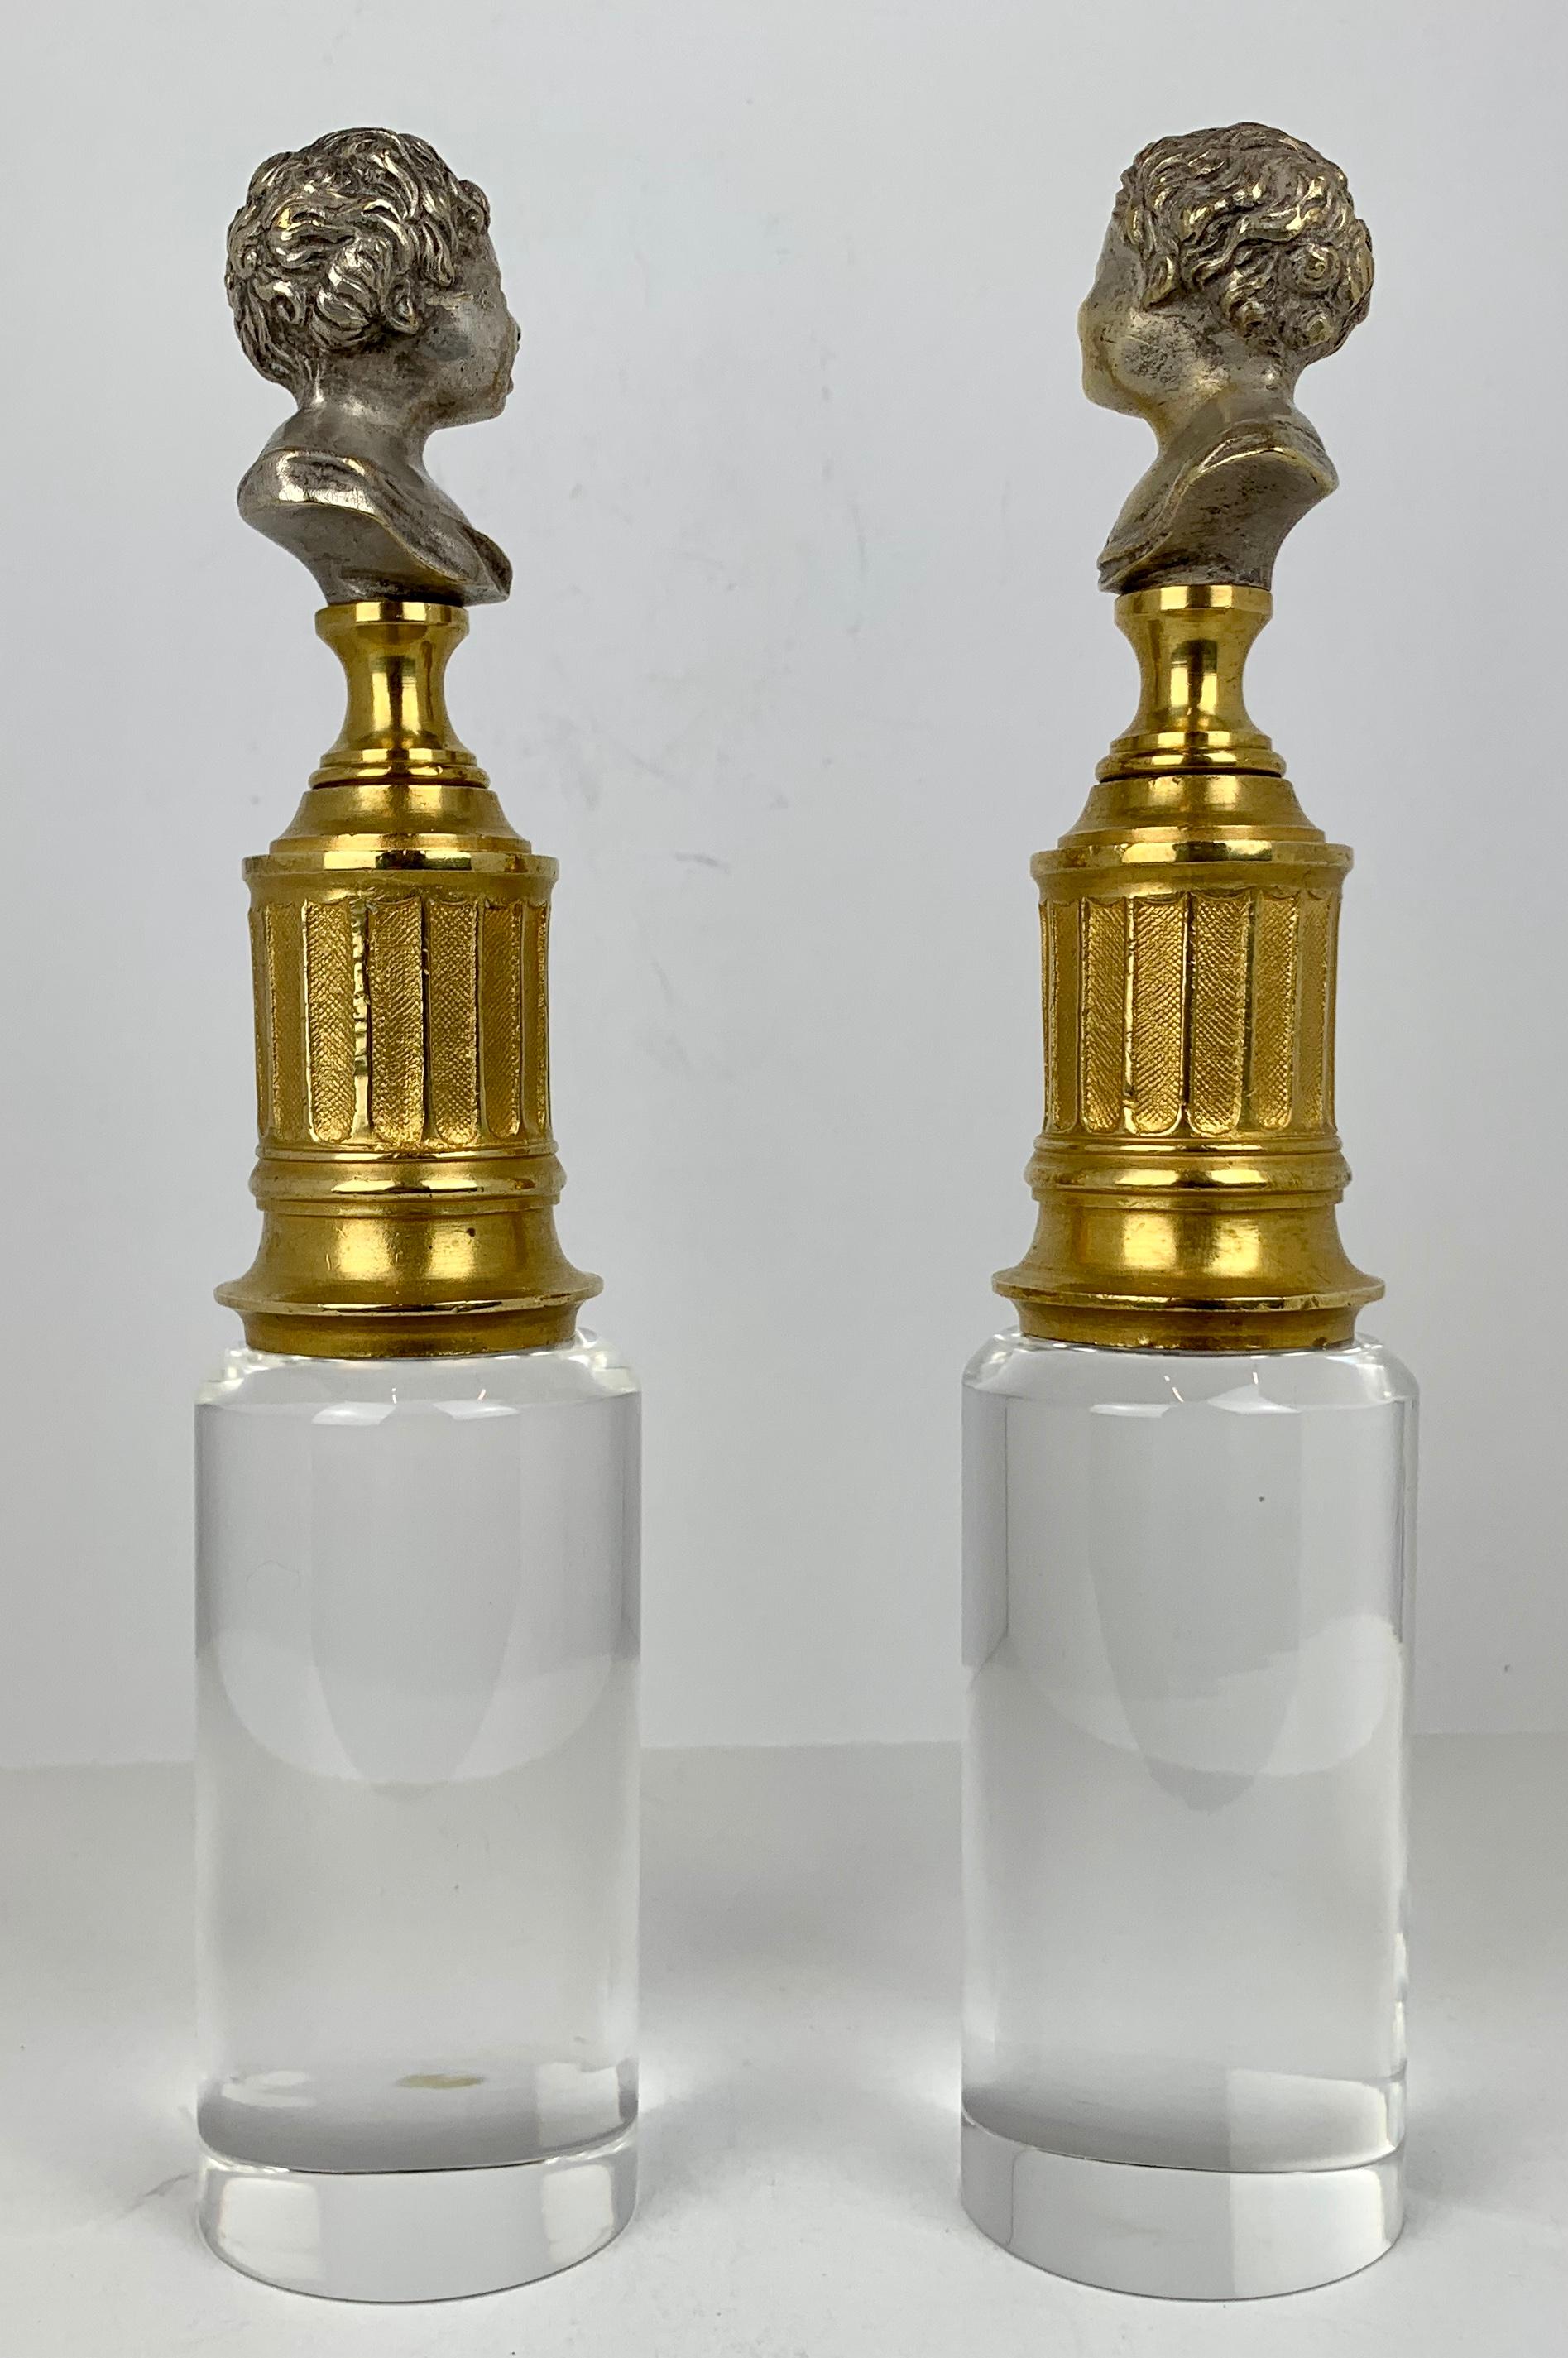 Neoclassical Revival Crying Babies in Gilt  Bronze on Fluted Columns after Jean-Antoine Houdon For Sale